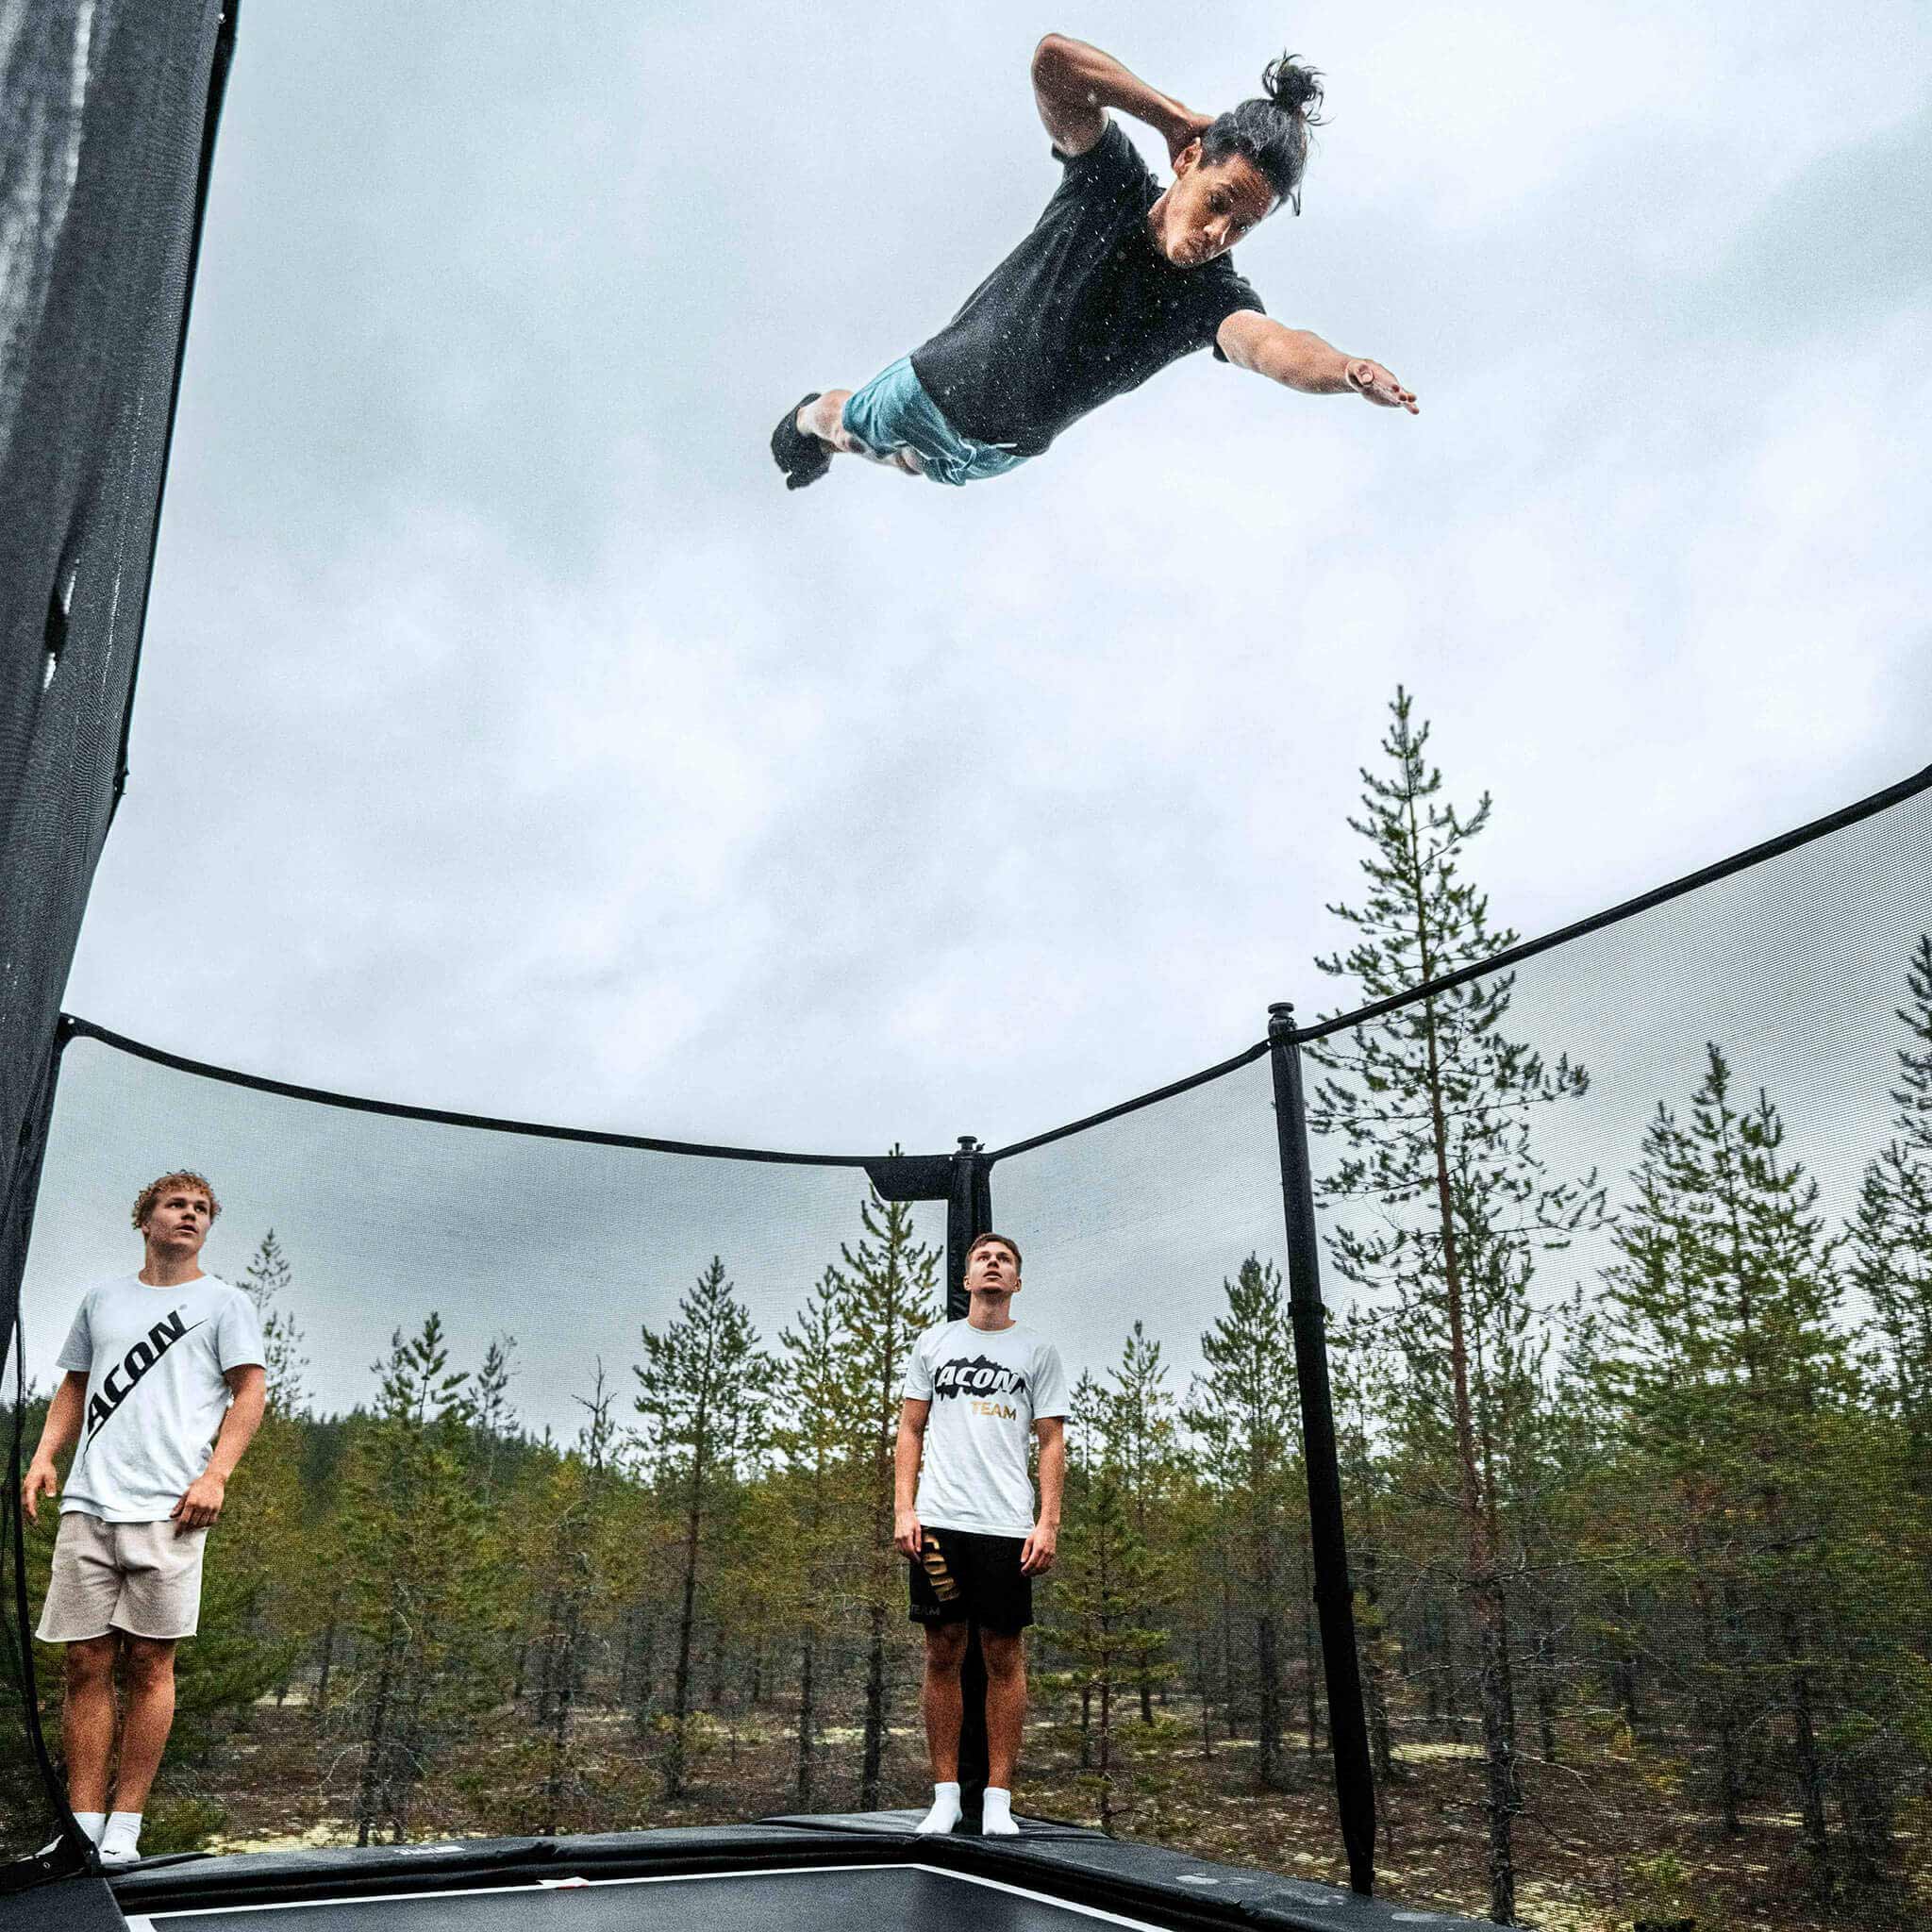 Trampoline trickster and his mates as an audience on an Acon X Trampoline.